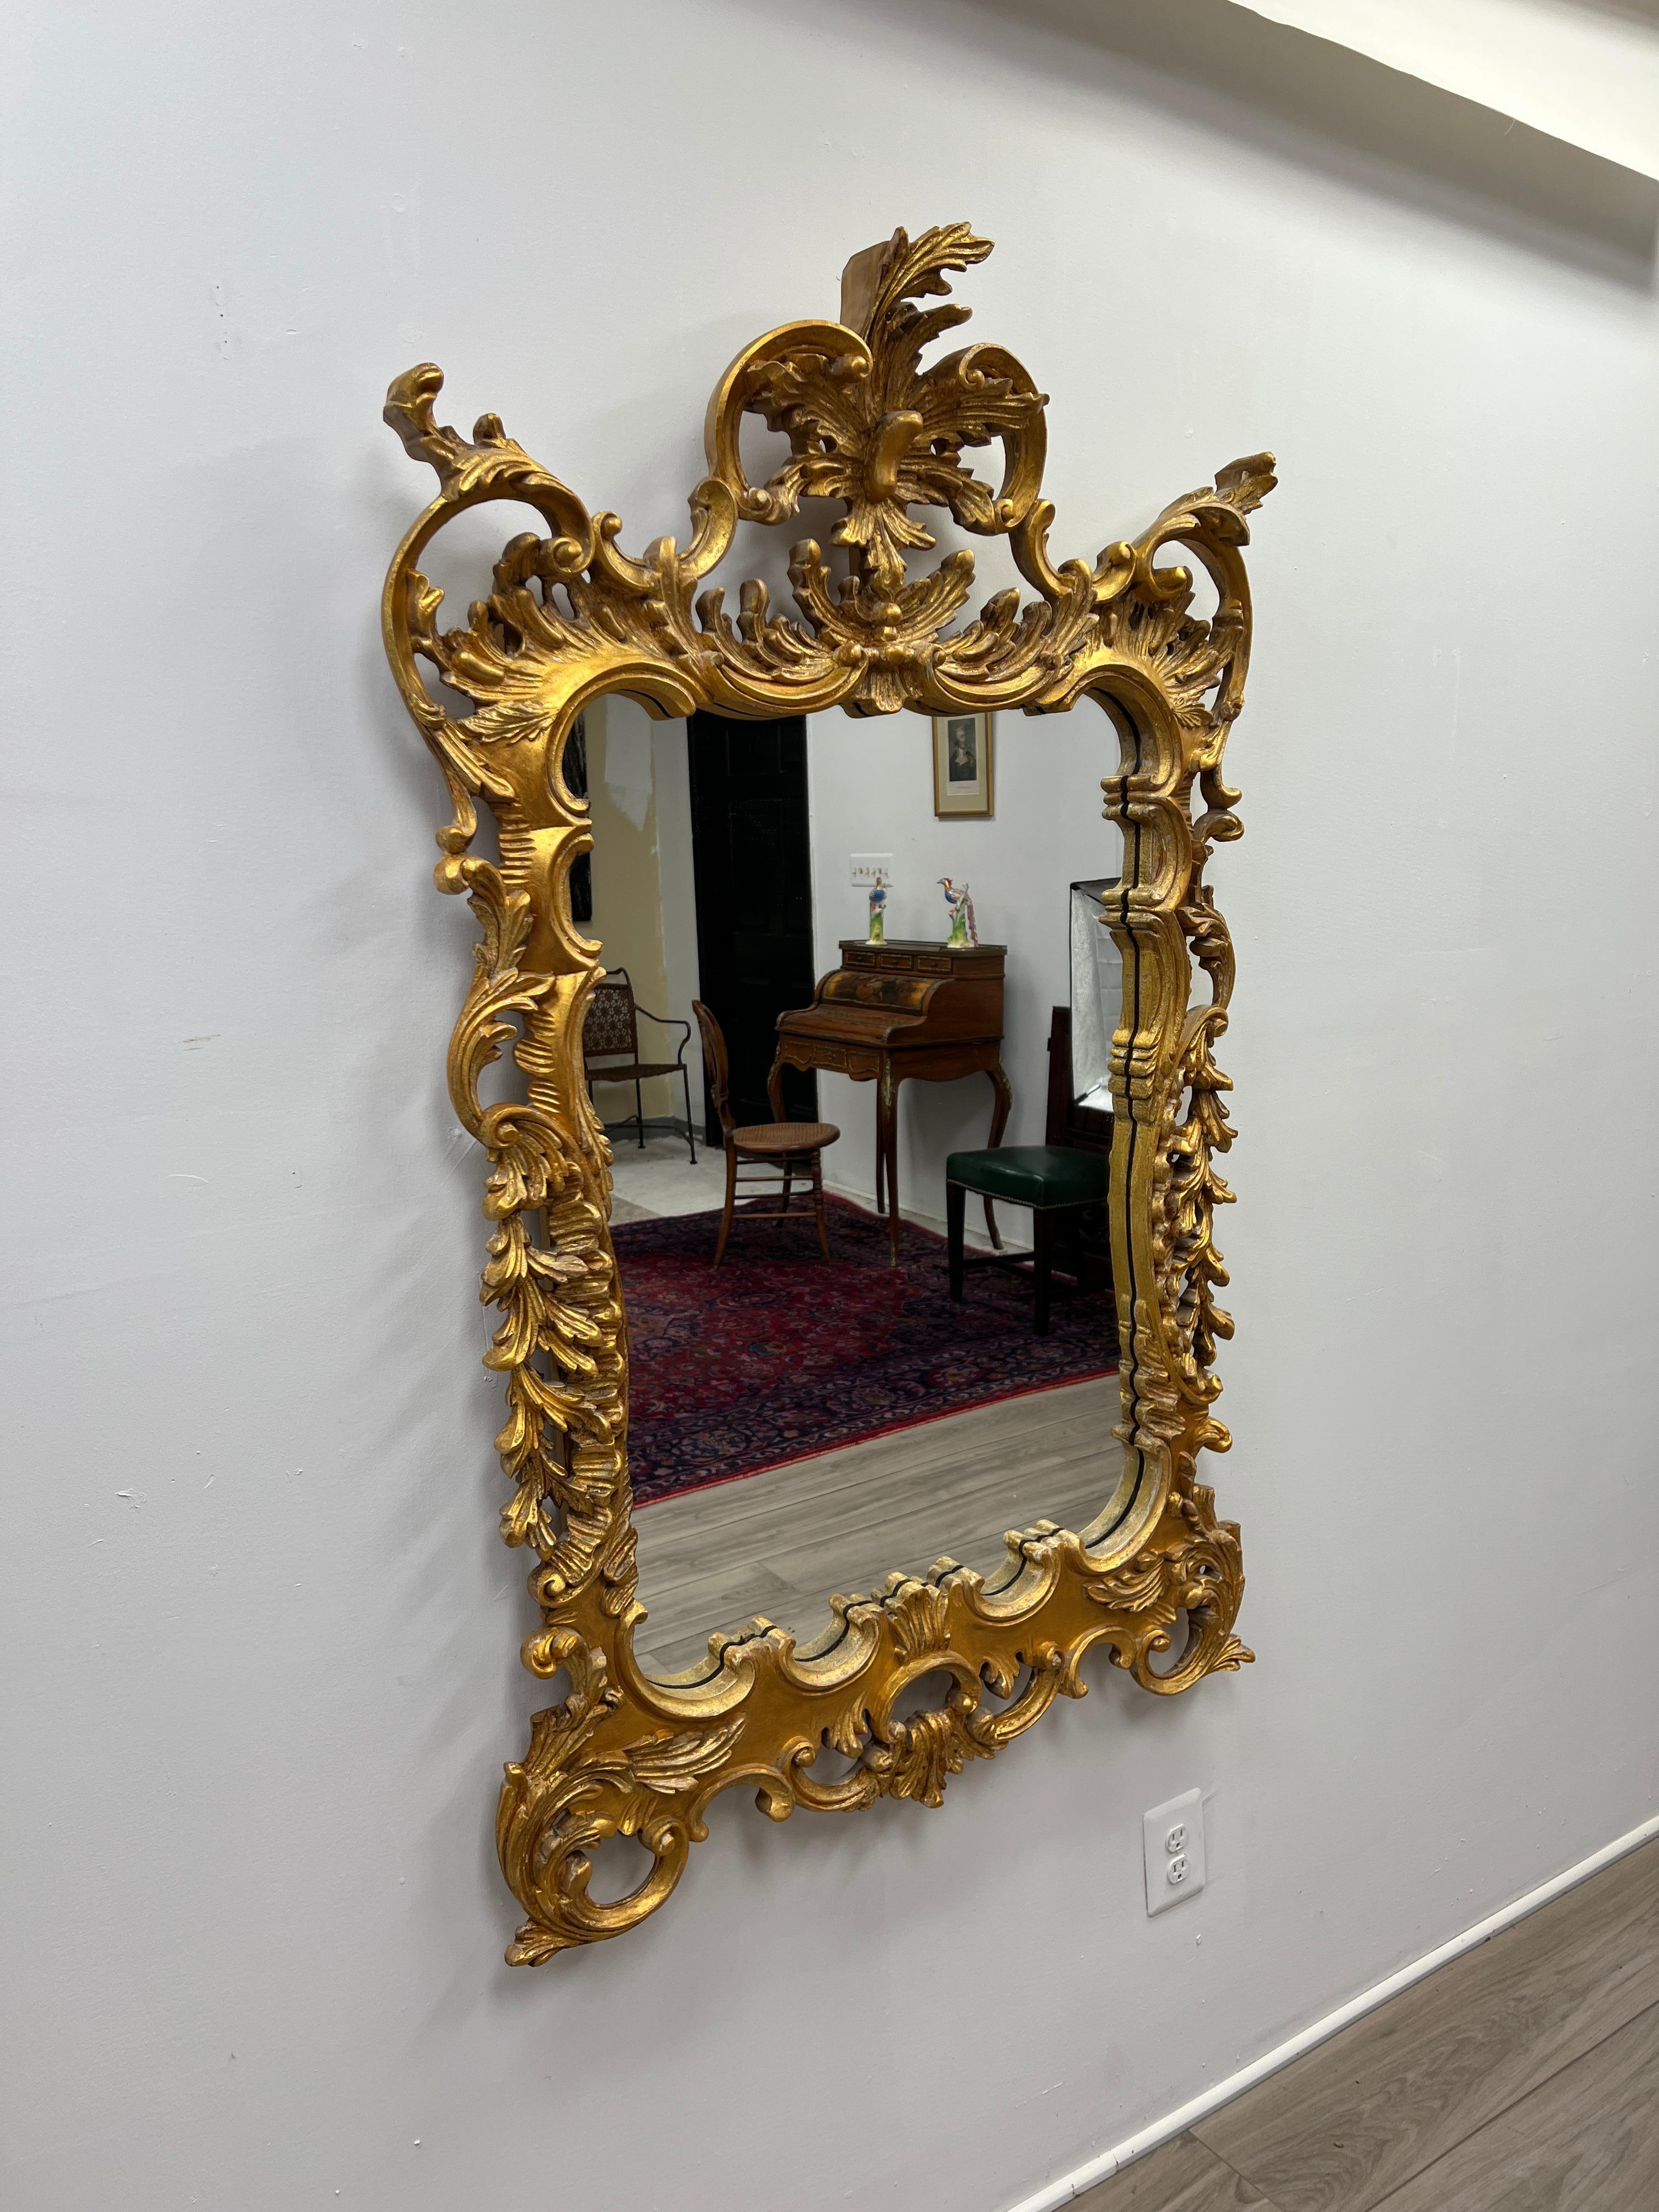 Here is featured a large Italian hand carved gilt wood mirror or looking glass in the Rococo style. This mirror was manufactured circa 1950-1960 in Italy for Debarge Mirrors. The frame is made from fruit wood and completely hand carved. The carvings